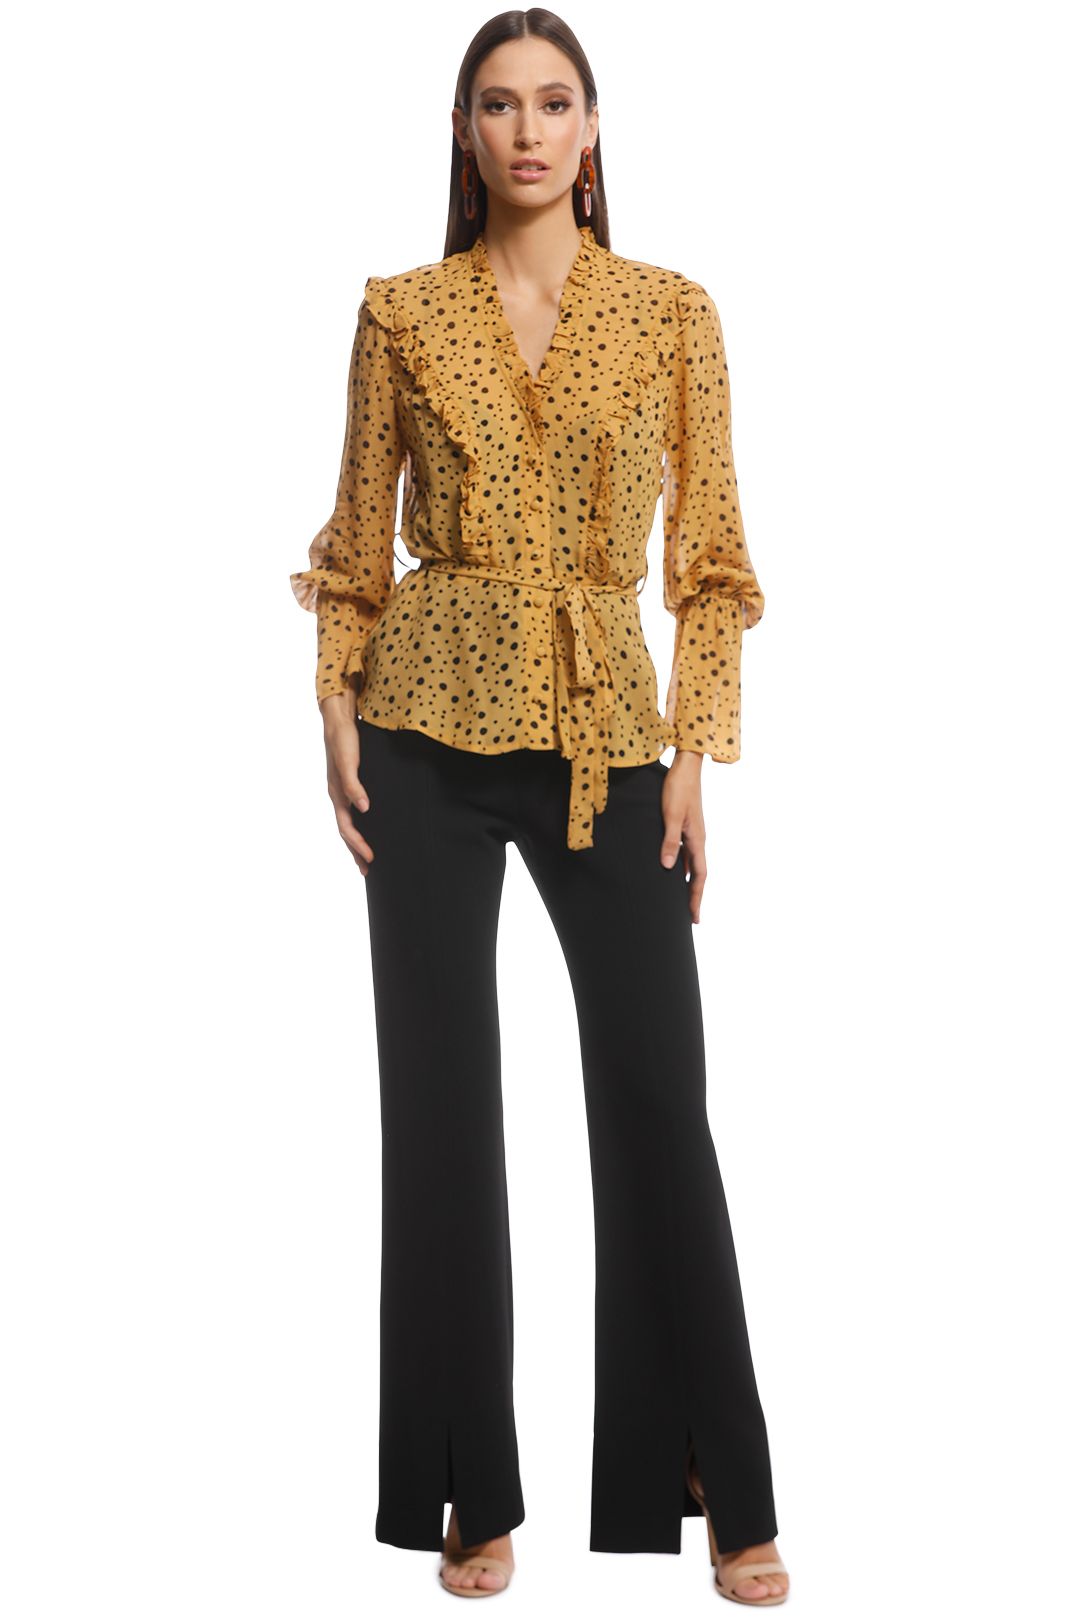 Ministry of Style - Songbird Top - Yellow Polkadot - Front